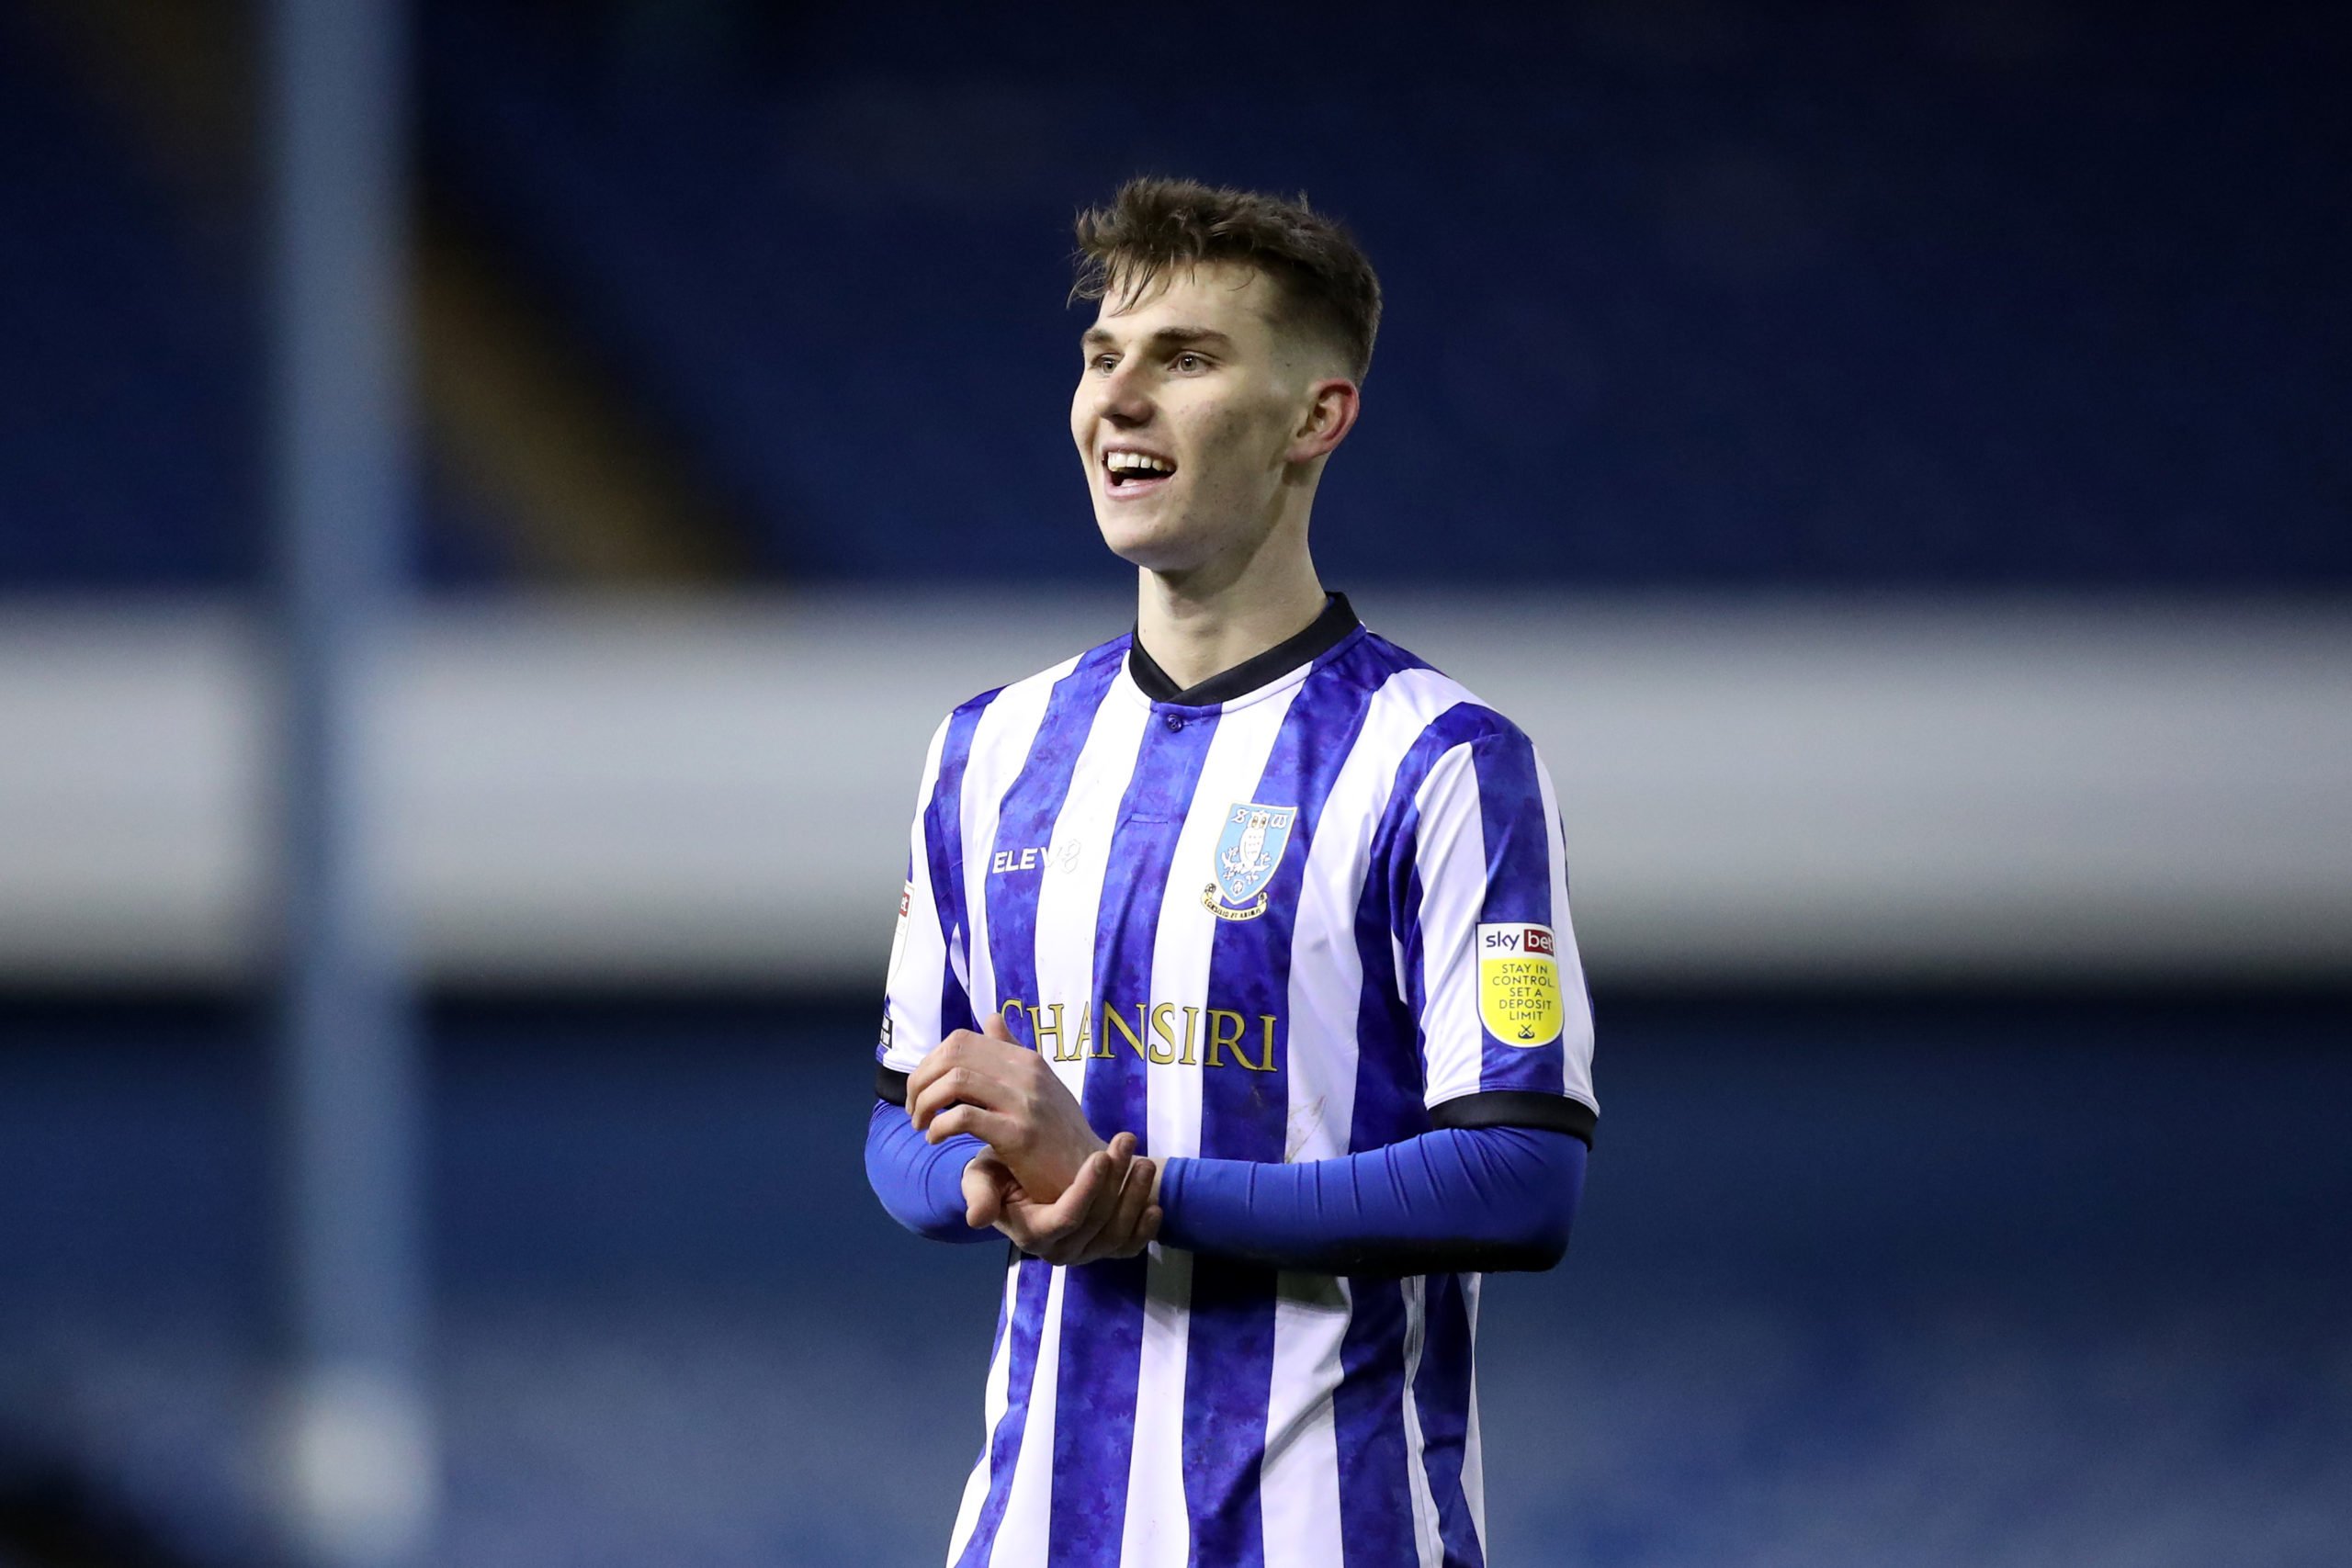 Sheffield Wednesday midfielder Liam Shaw has signed for Celtic